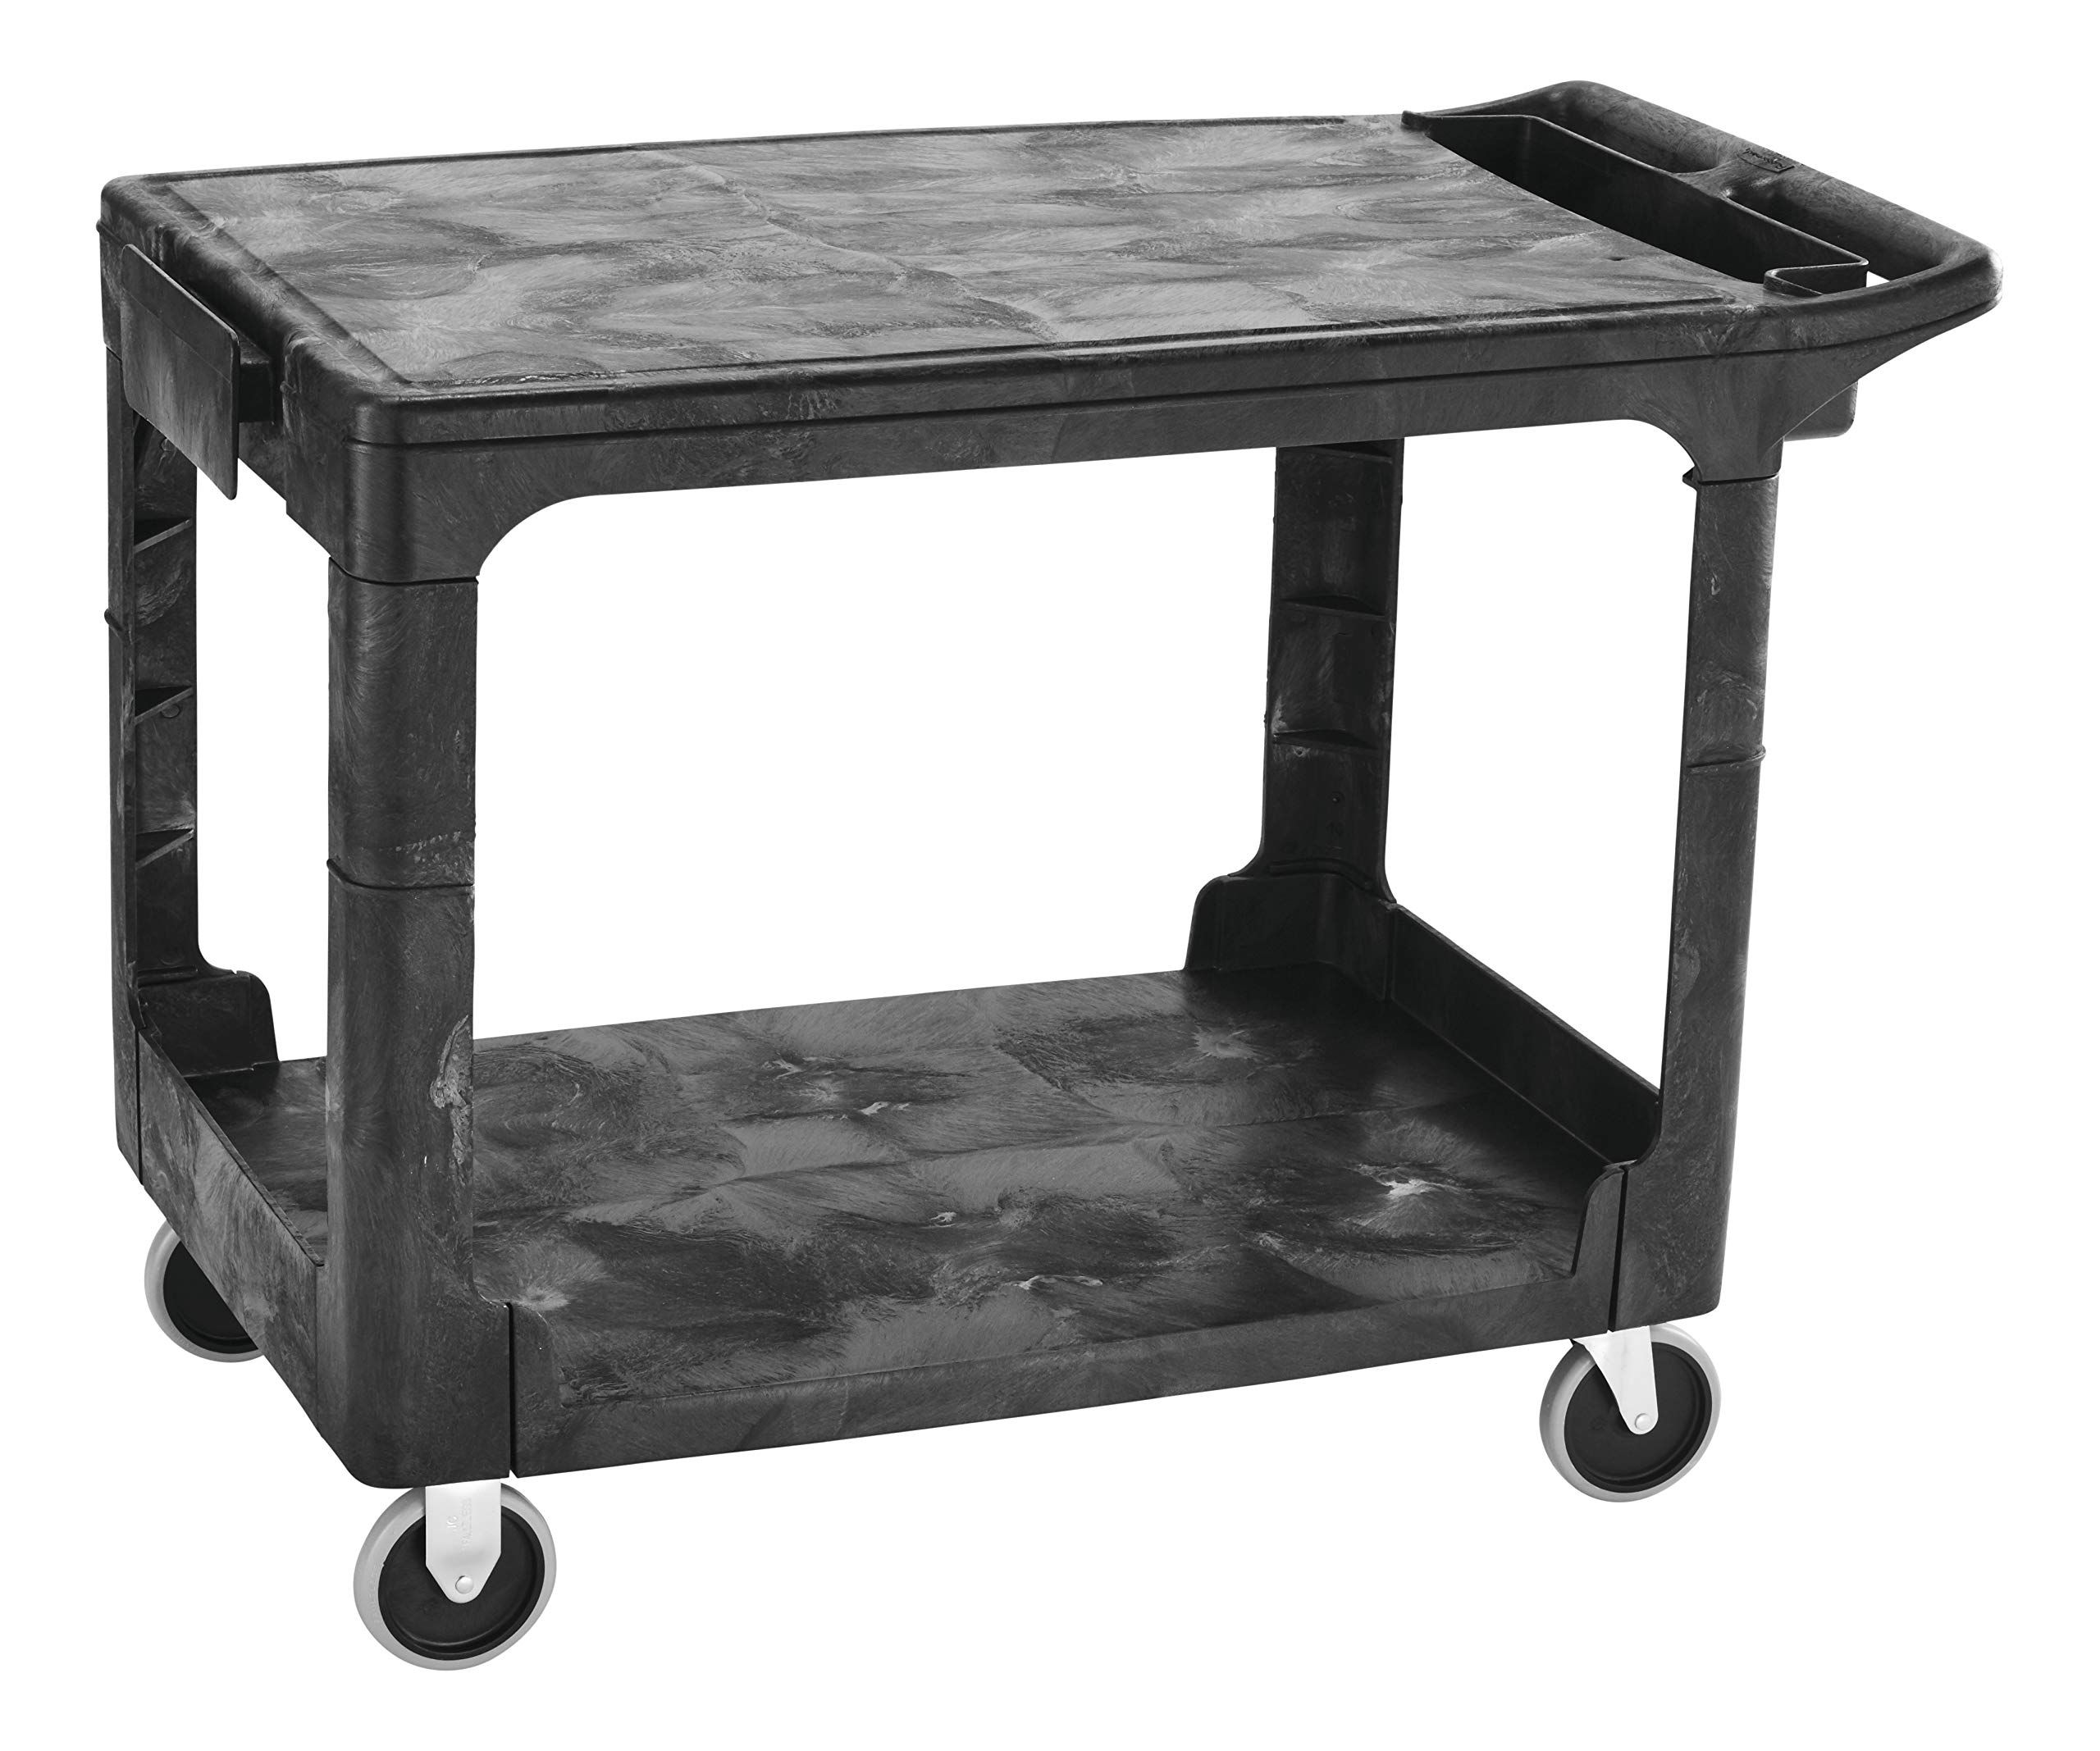 Rubbermaid Commercial Products Rubbermaid FG450500 Black 500 lbs Capacity Utility Cart with Two Shelves